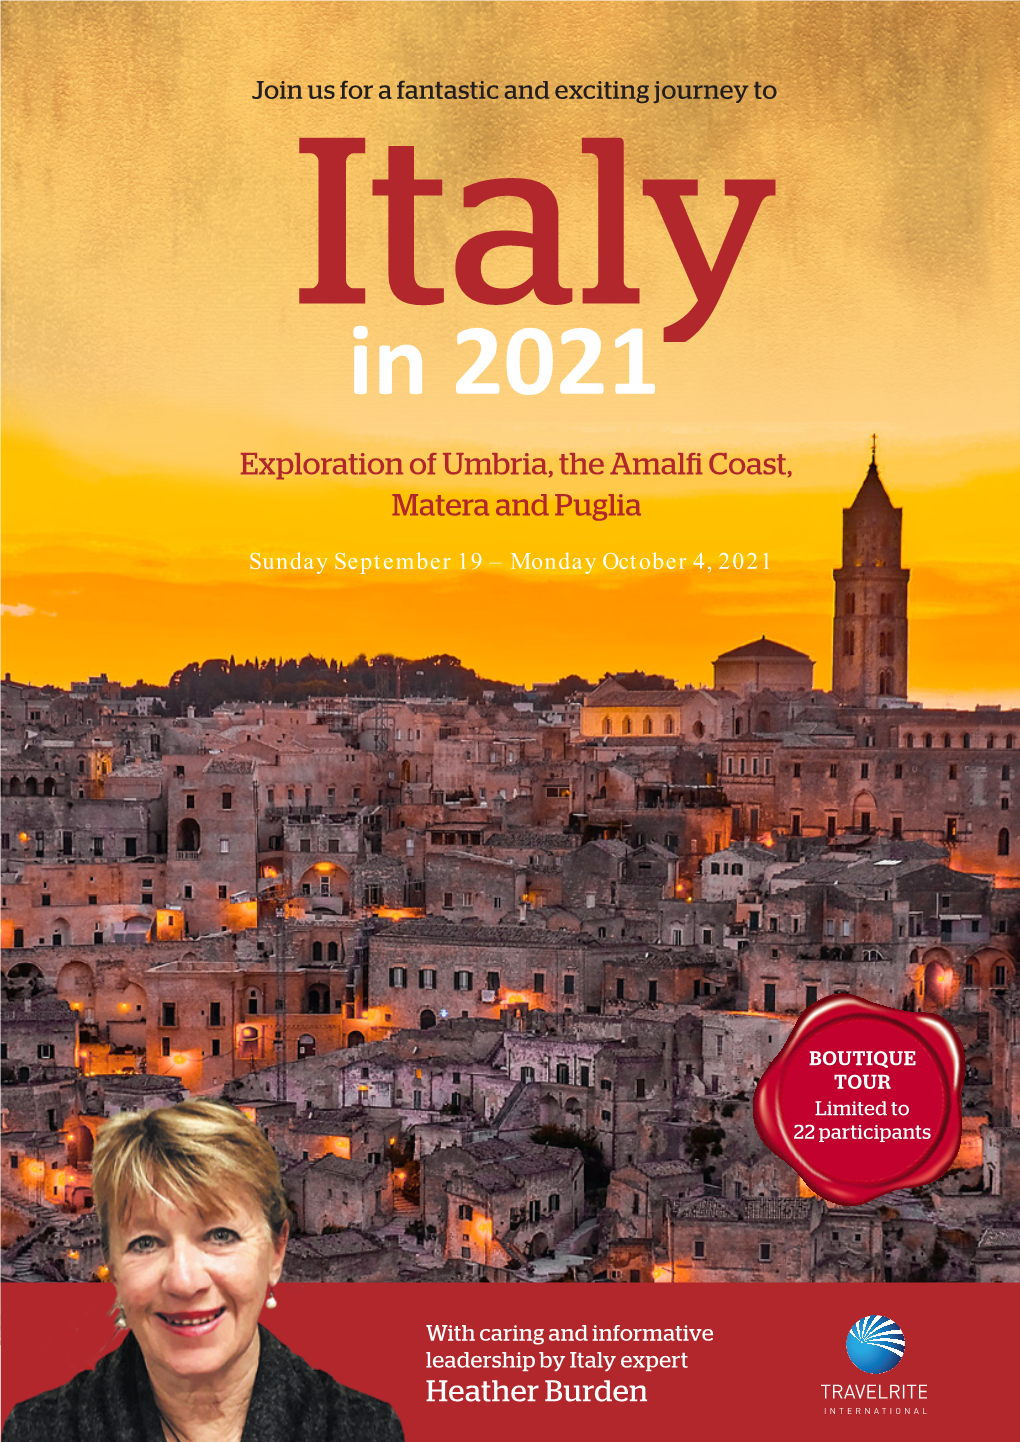 In 2021 Matera and Puglia Heather Burden Leadership by Italy Expert with Caring and Informative 19 –Mondayoctober 4